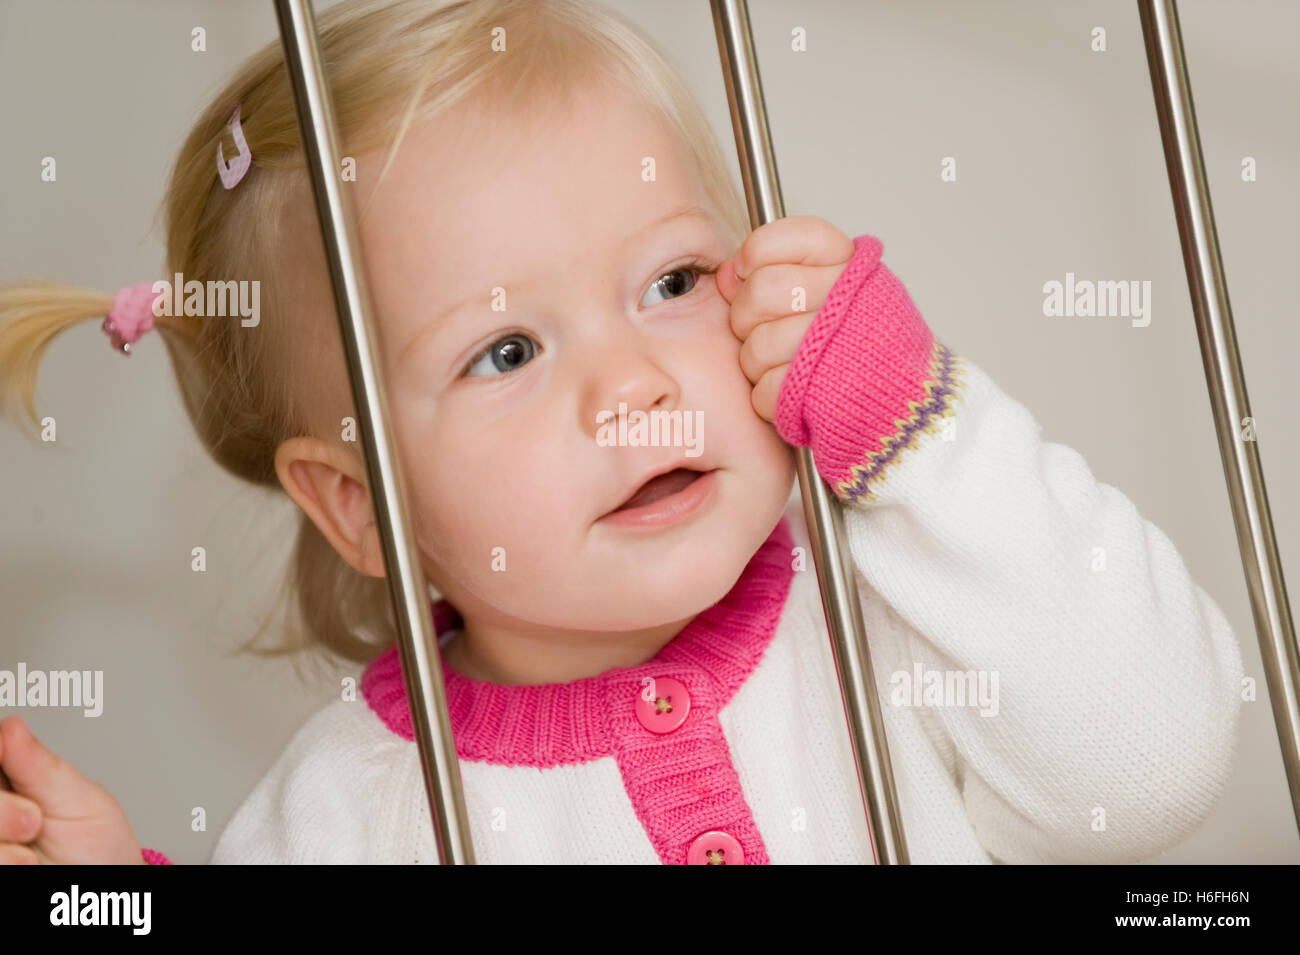 Blonde, 1-year old girl, behind bars Stock Photo